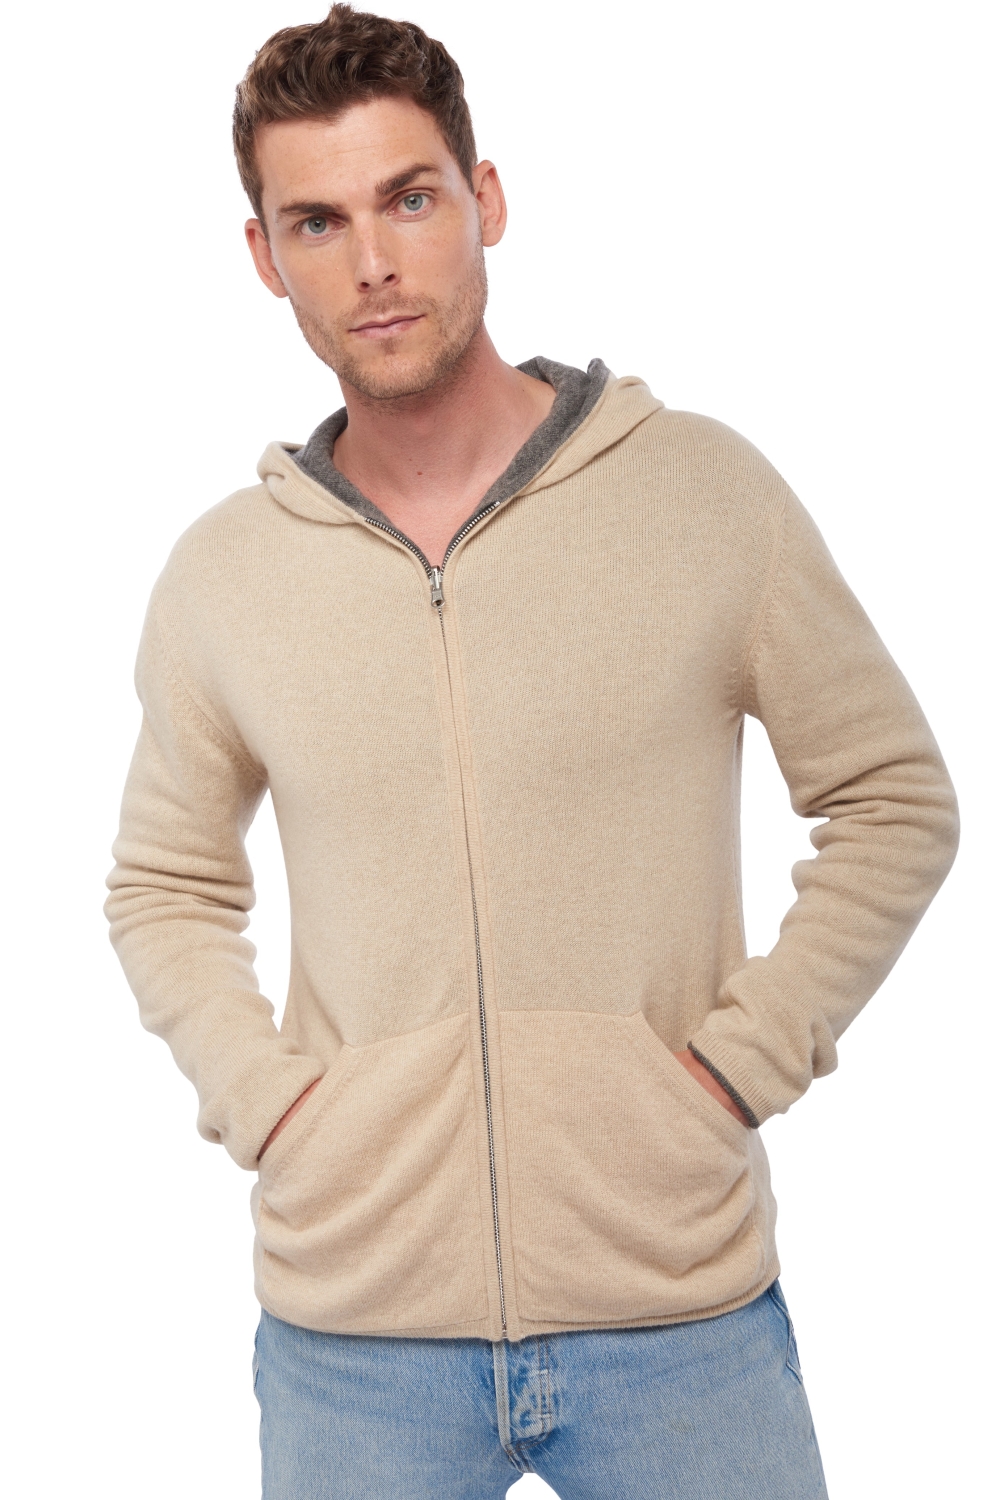 Cachemire pull homme carson marmotte chine natural beige 2xl